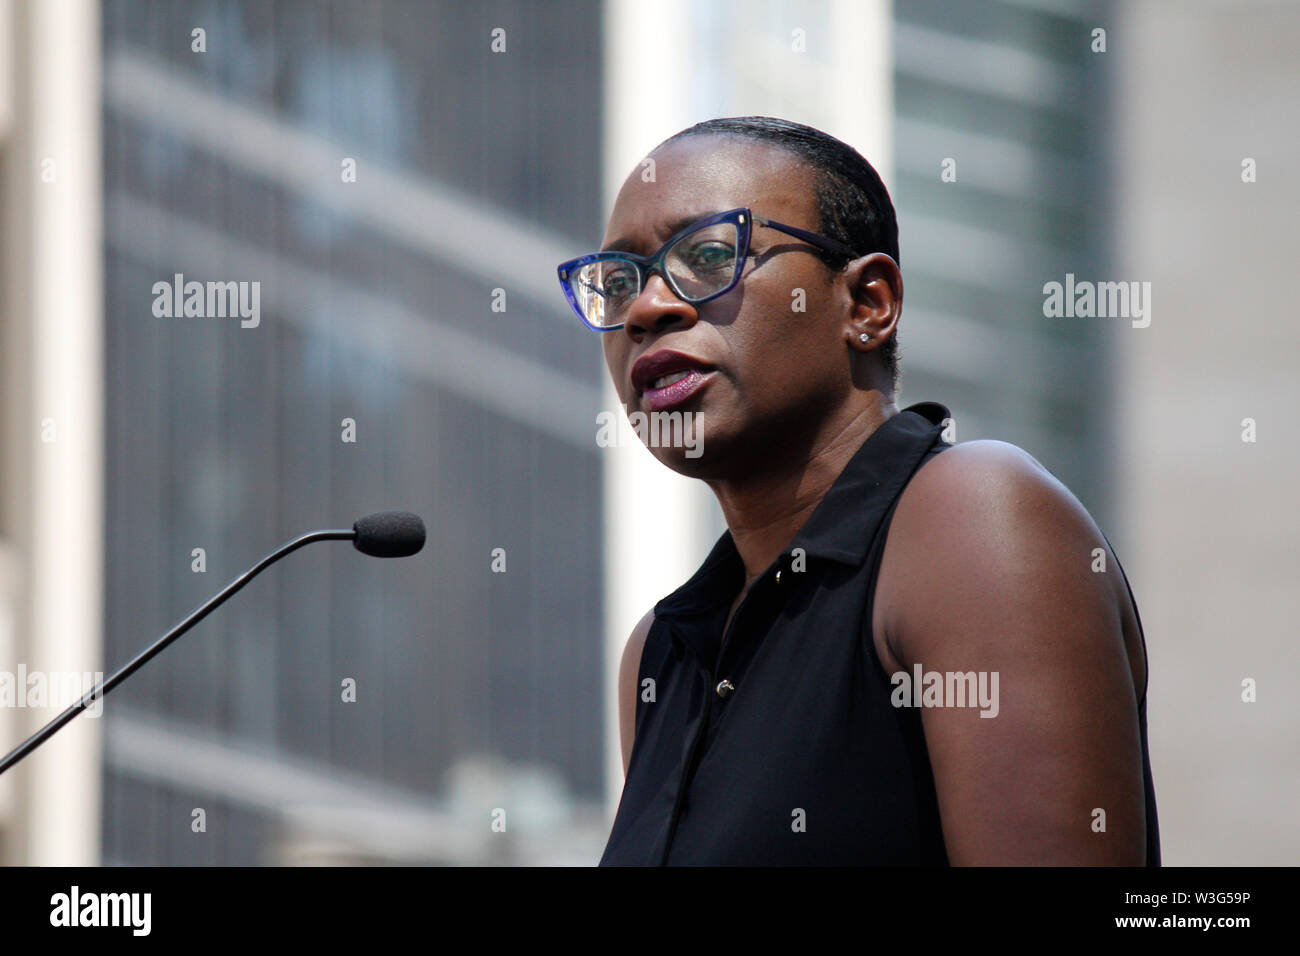 Philadelphia, PA, USA - July 15, 2019: Bernie2020 campaign co-chair Sen. Nina Turner introduces Democratic presidential candidate Sen. Bernie Sanders at a rally to stop the impending closure of Hahnemann University Hospital in Center City, Philadelphia. Credit: Jana Shea/OOgImages Stock Photo